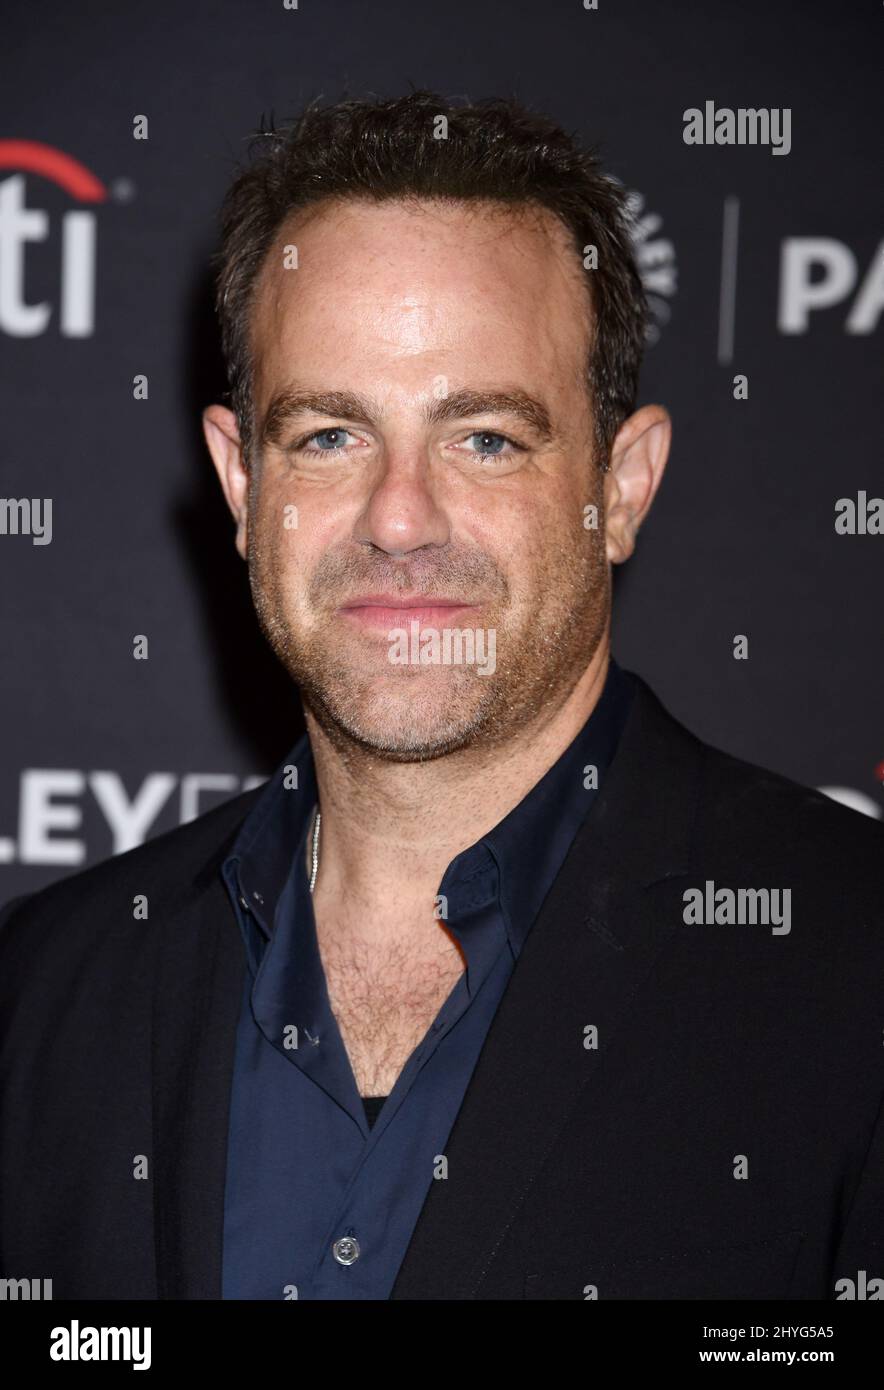 Paul Adelstein al Paley Center for Media's 12th Annual PALEYFEST Fall TV Preview - NBC 'i Feel Bad' tenuto al Paley Center for Media il 10 settembre 2018 a Beverly Hills, CA. Foto Stock